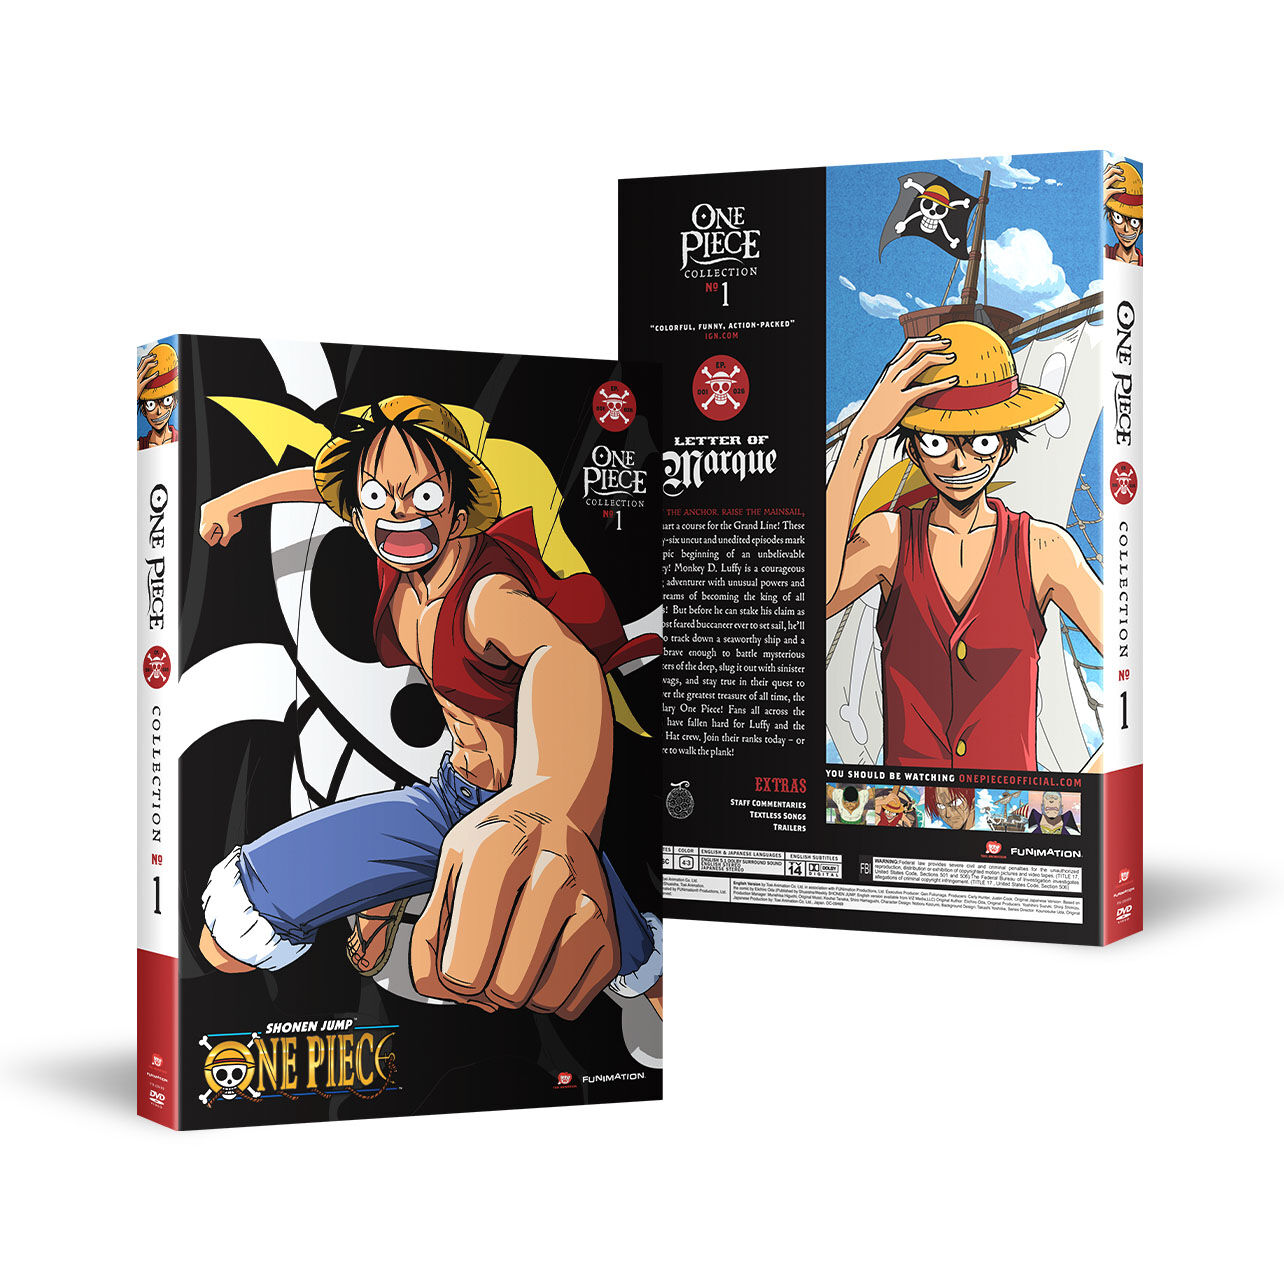 One Piece - Collection 1 - DVD | Crunchyroll Store